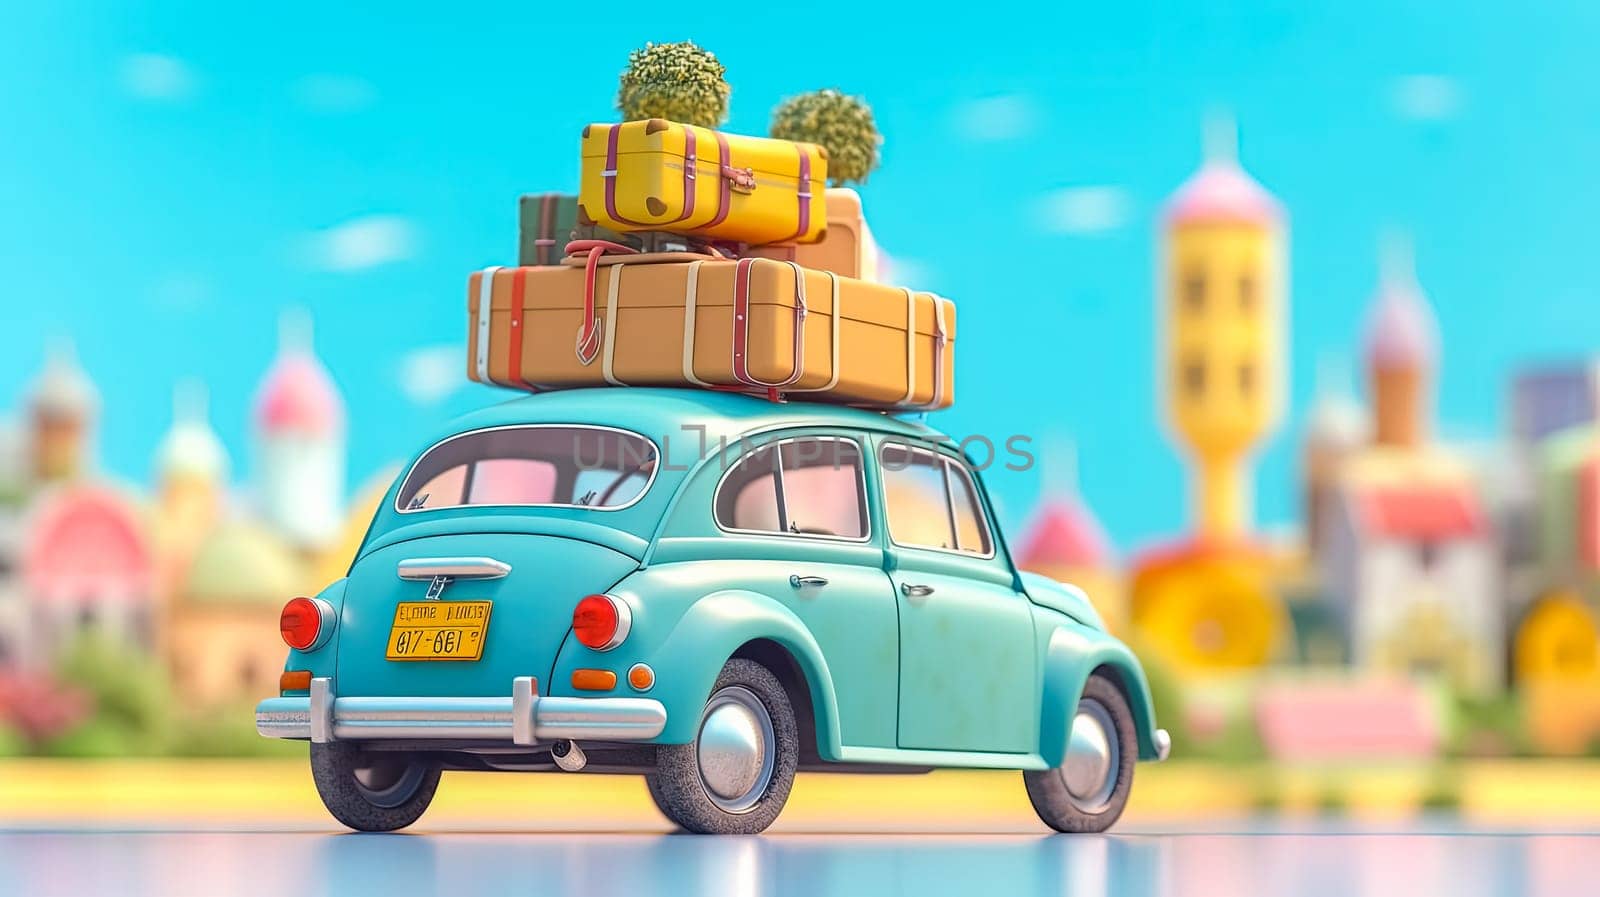 A compact retro car, rooftop loaded with luggage and beach essentials by Alla_Morozova93